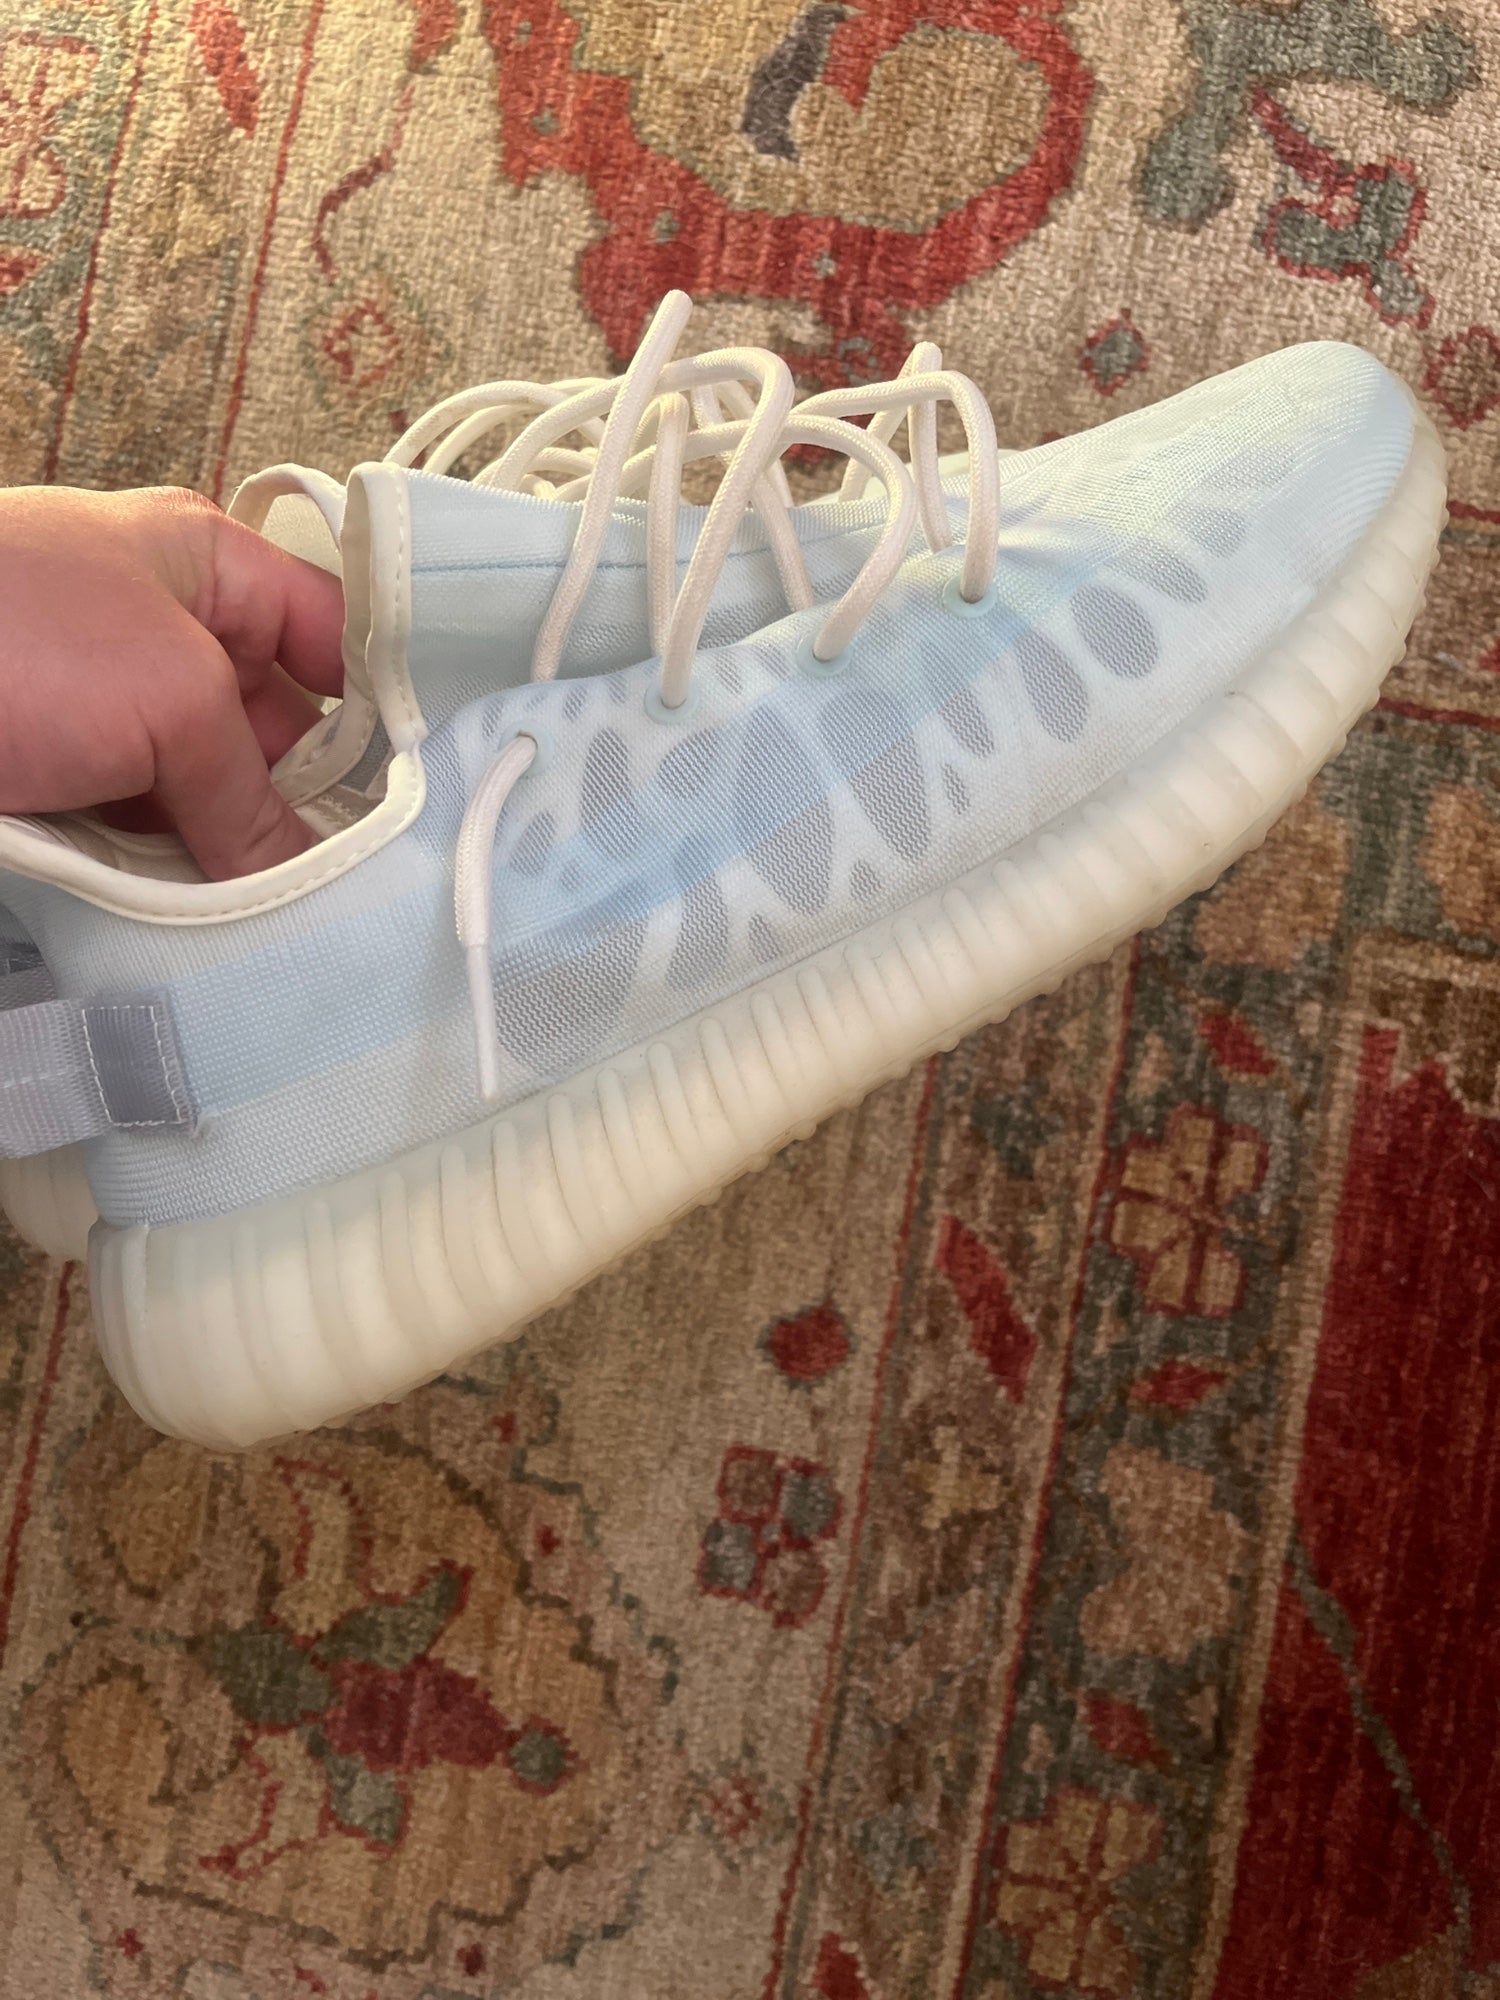 Adidas Yeezy Boost 350 V2 Cloud White (Reflective)